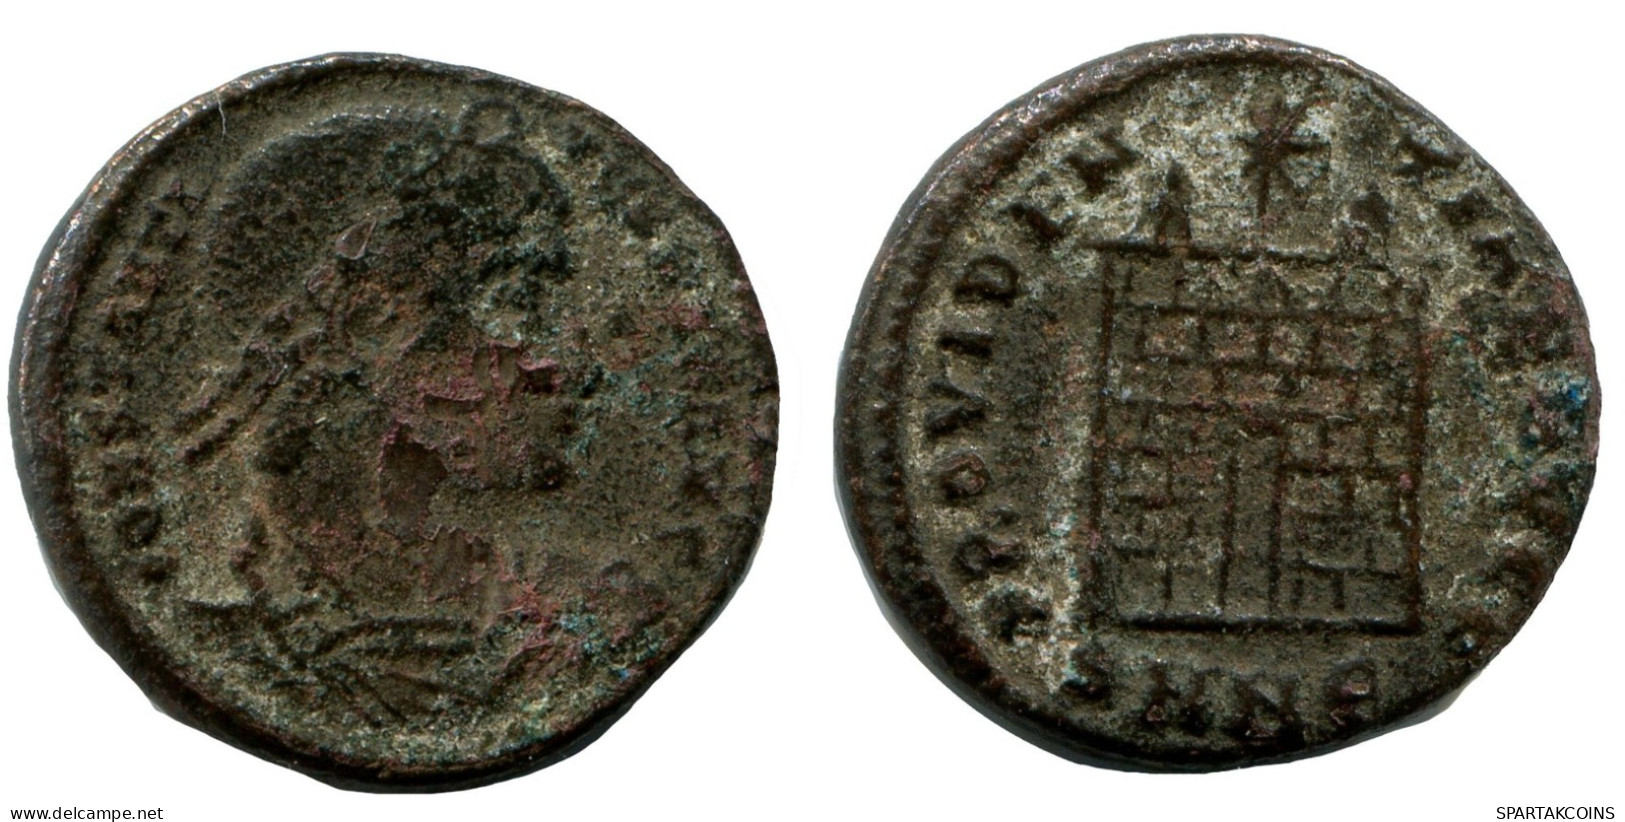 CONSTANTINE I MINTED IN NICOMEDIA FROM THE ROYAL ONTARIO MUSEUM #ANC10881.14.F.A - El Imperio Christiano (307 / 363)